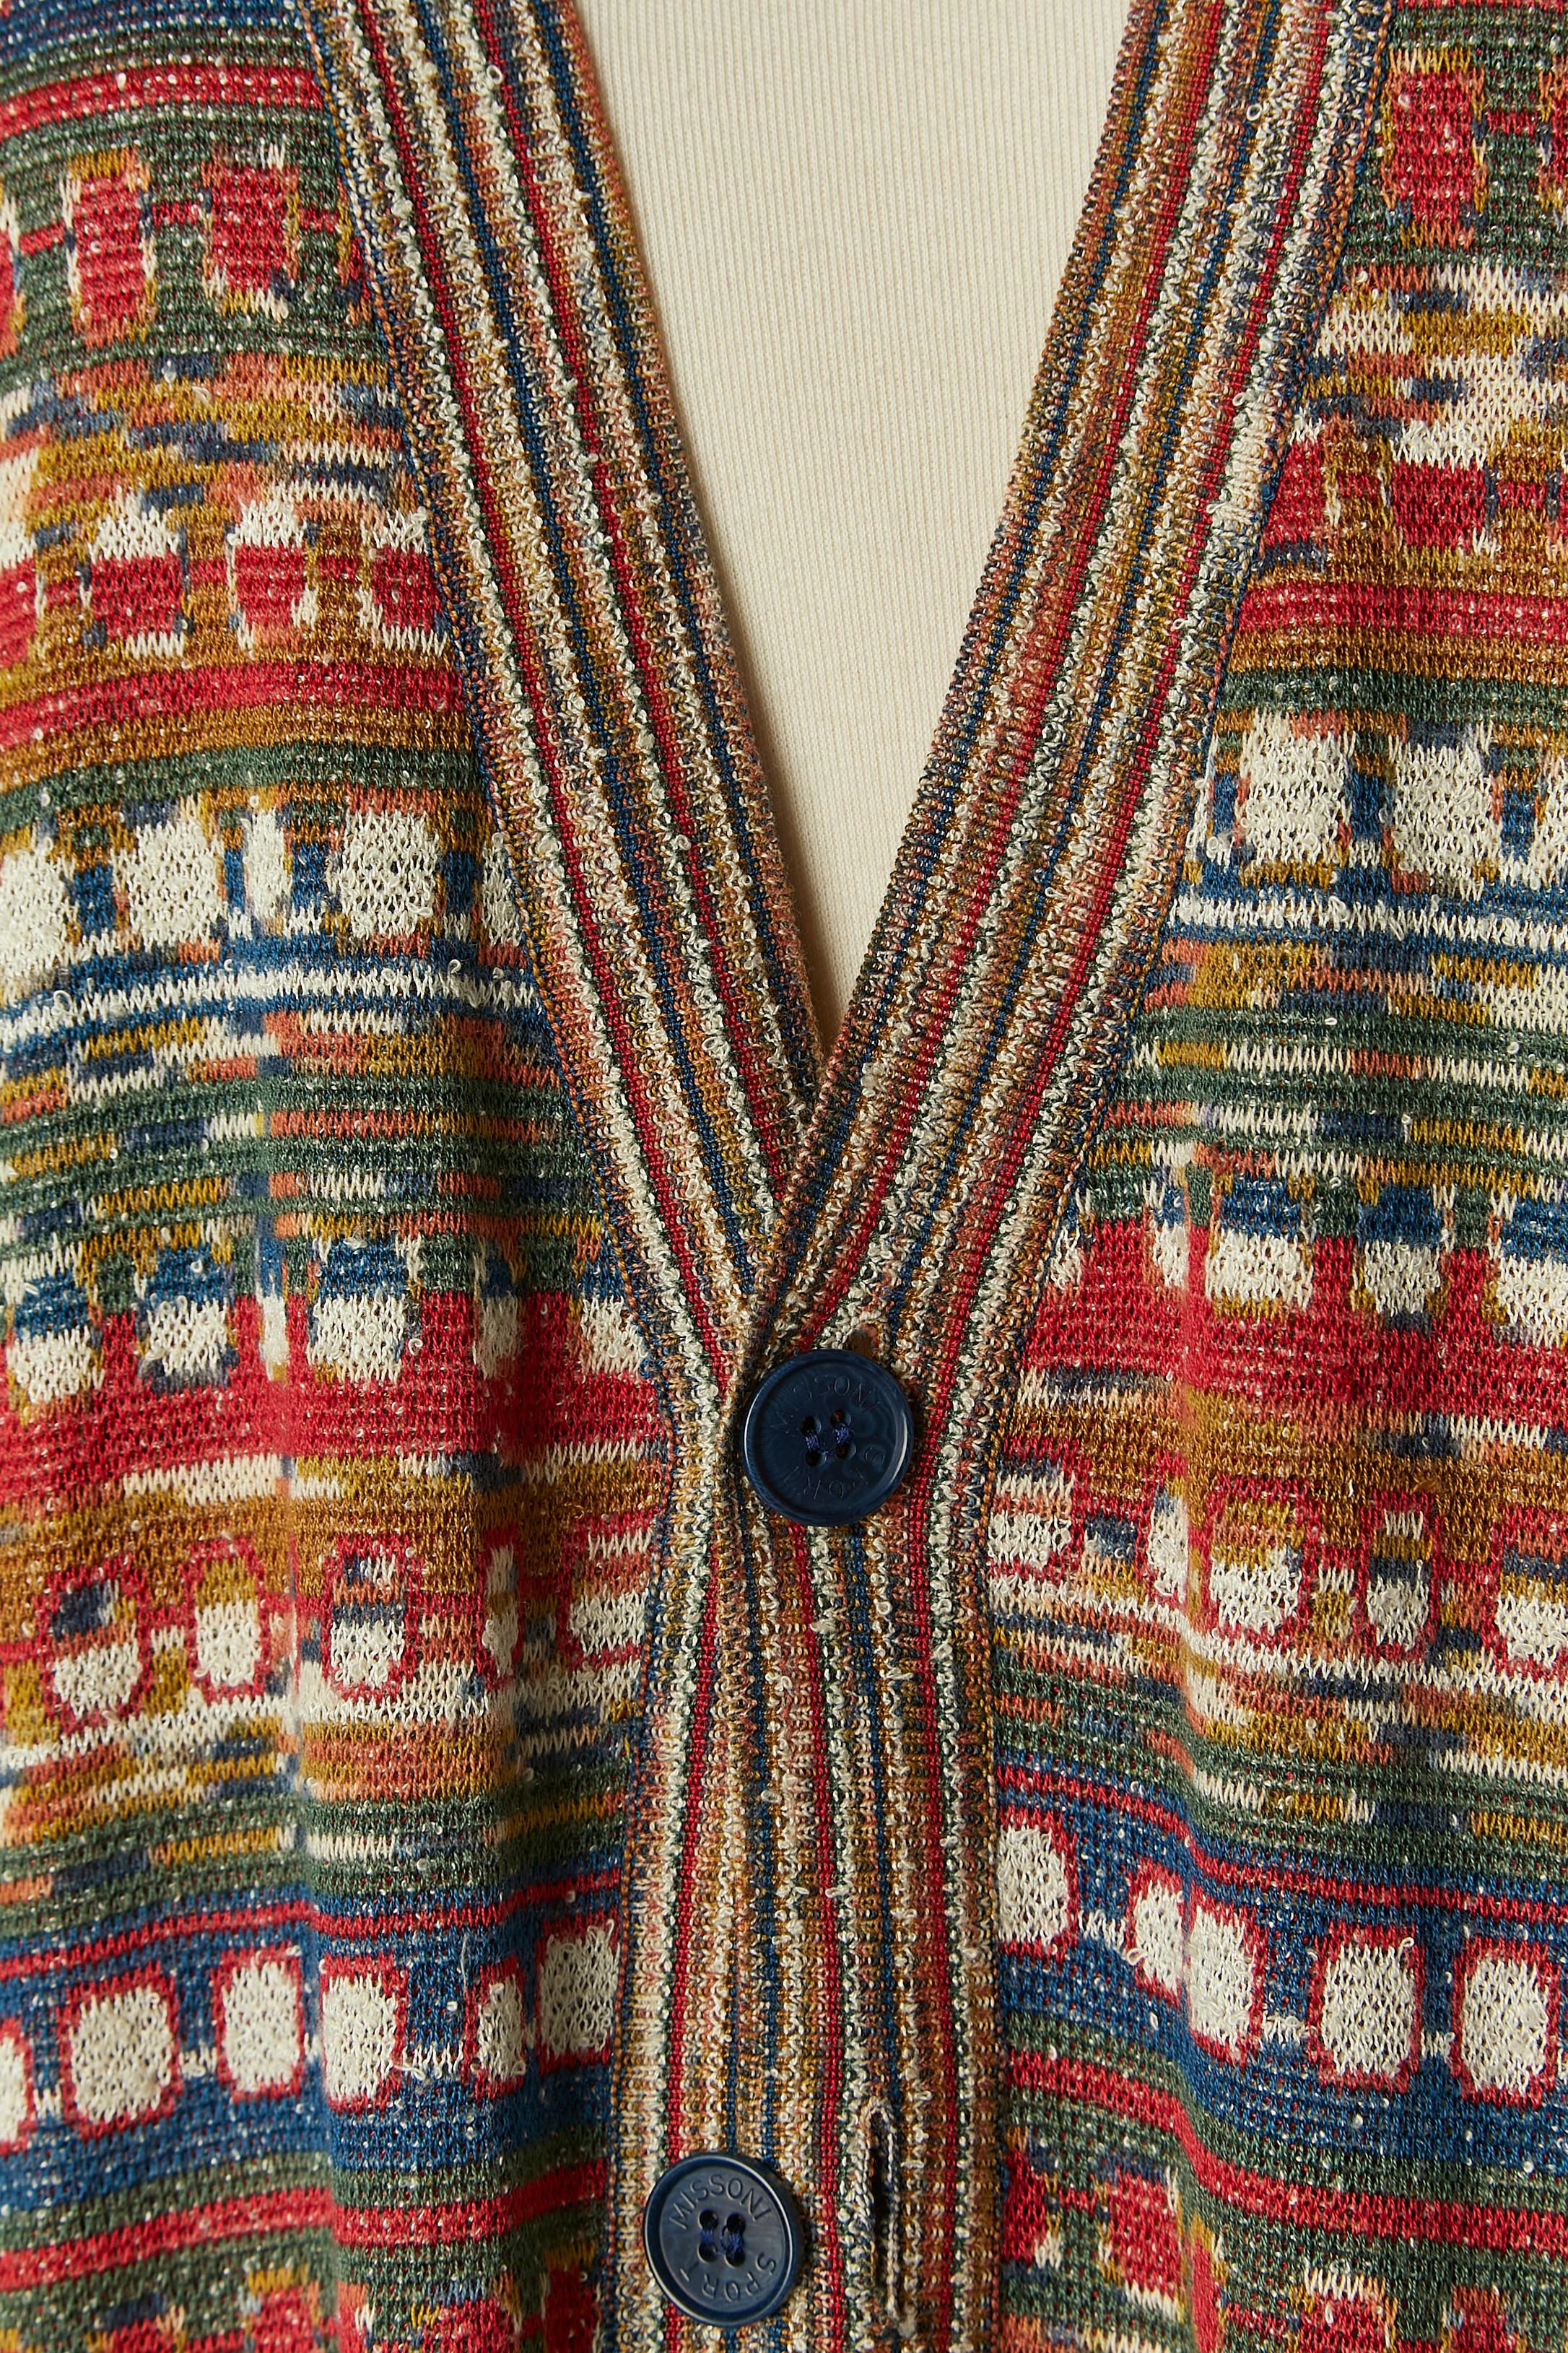 Multicolor jacquard cardigan with branded buttons. Knit composition: 70% cotton, 20% rayon, 10% polyamide. One extra button provided. Pocket on both side.
SIZE XL 